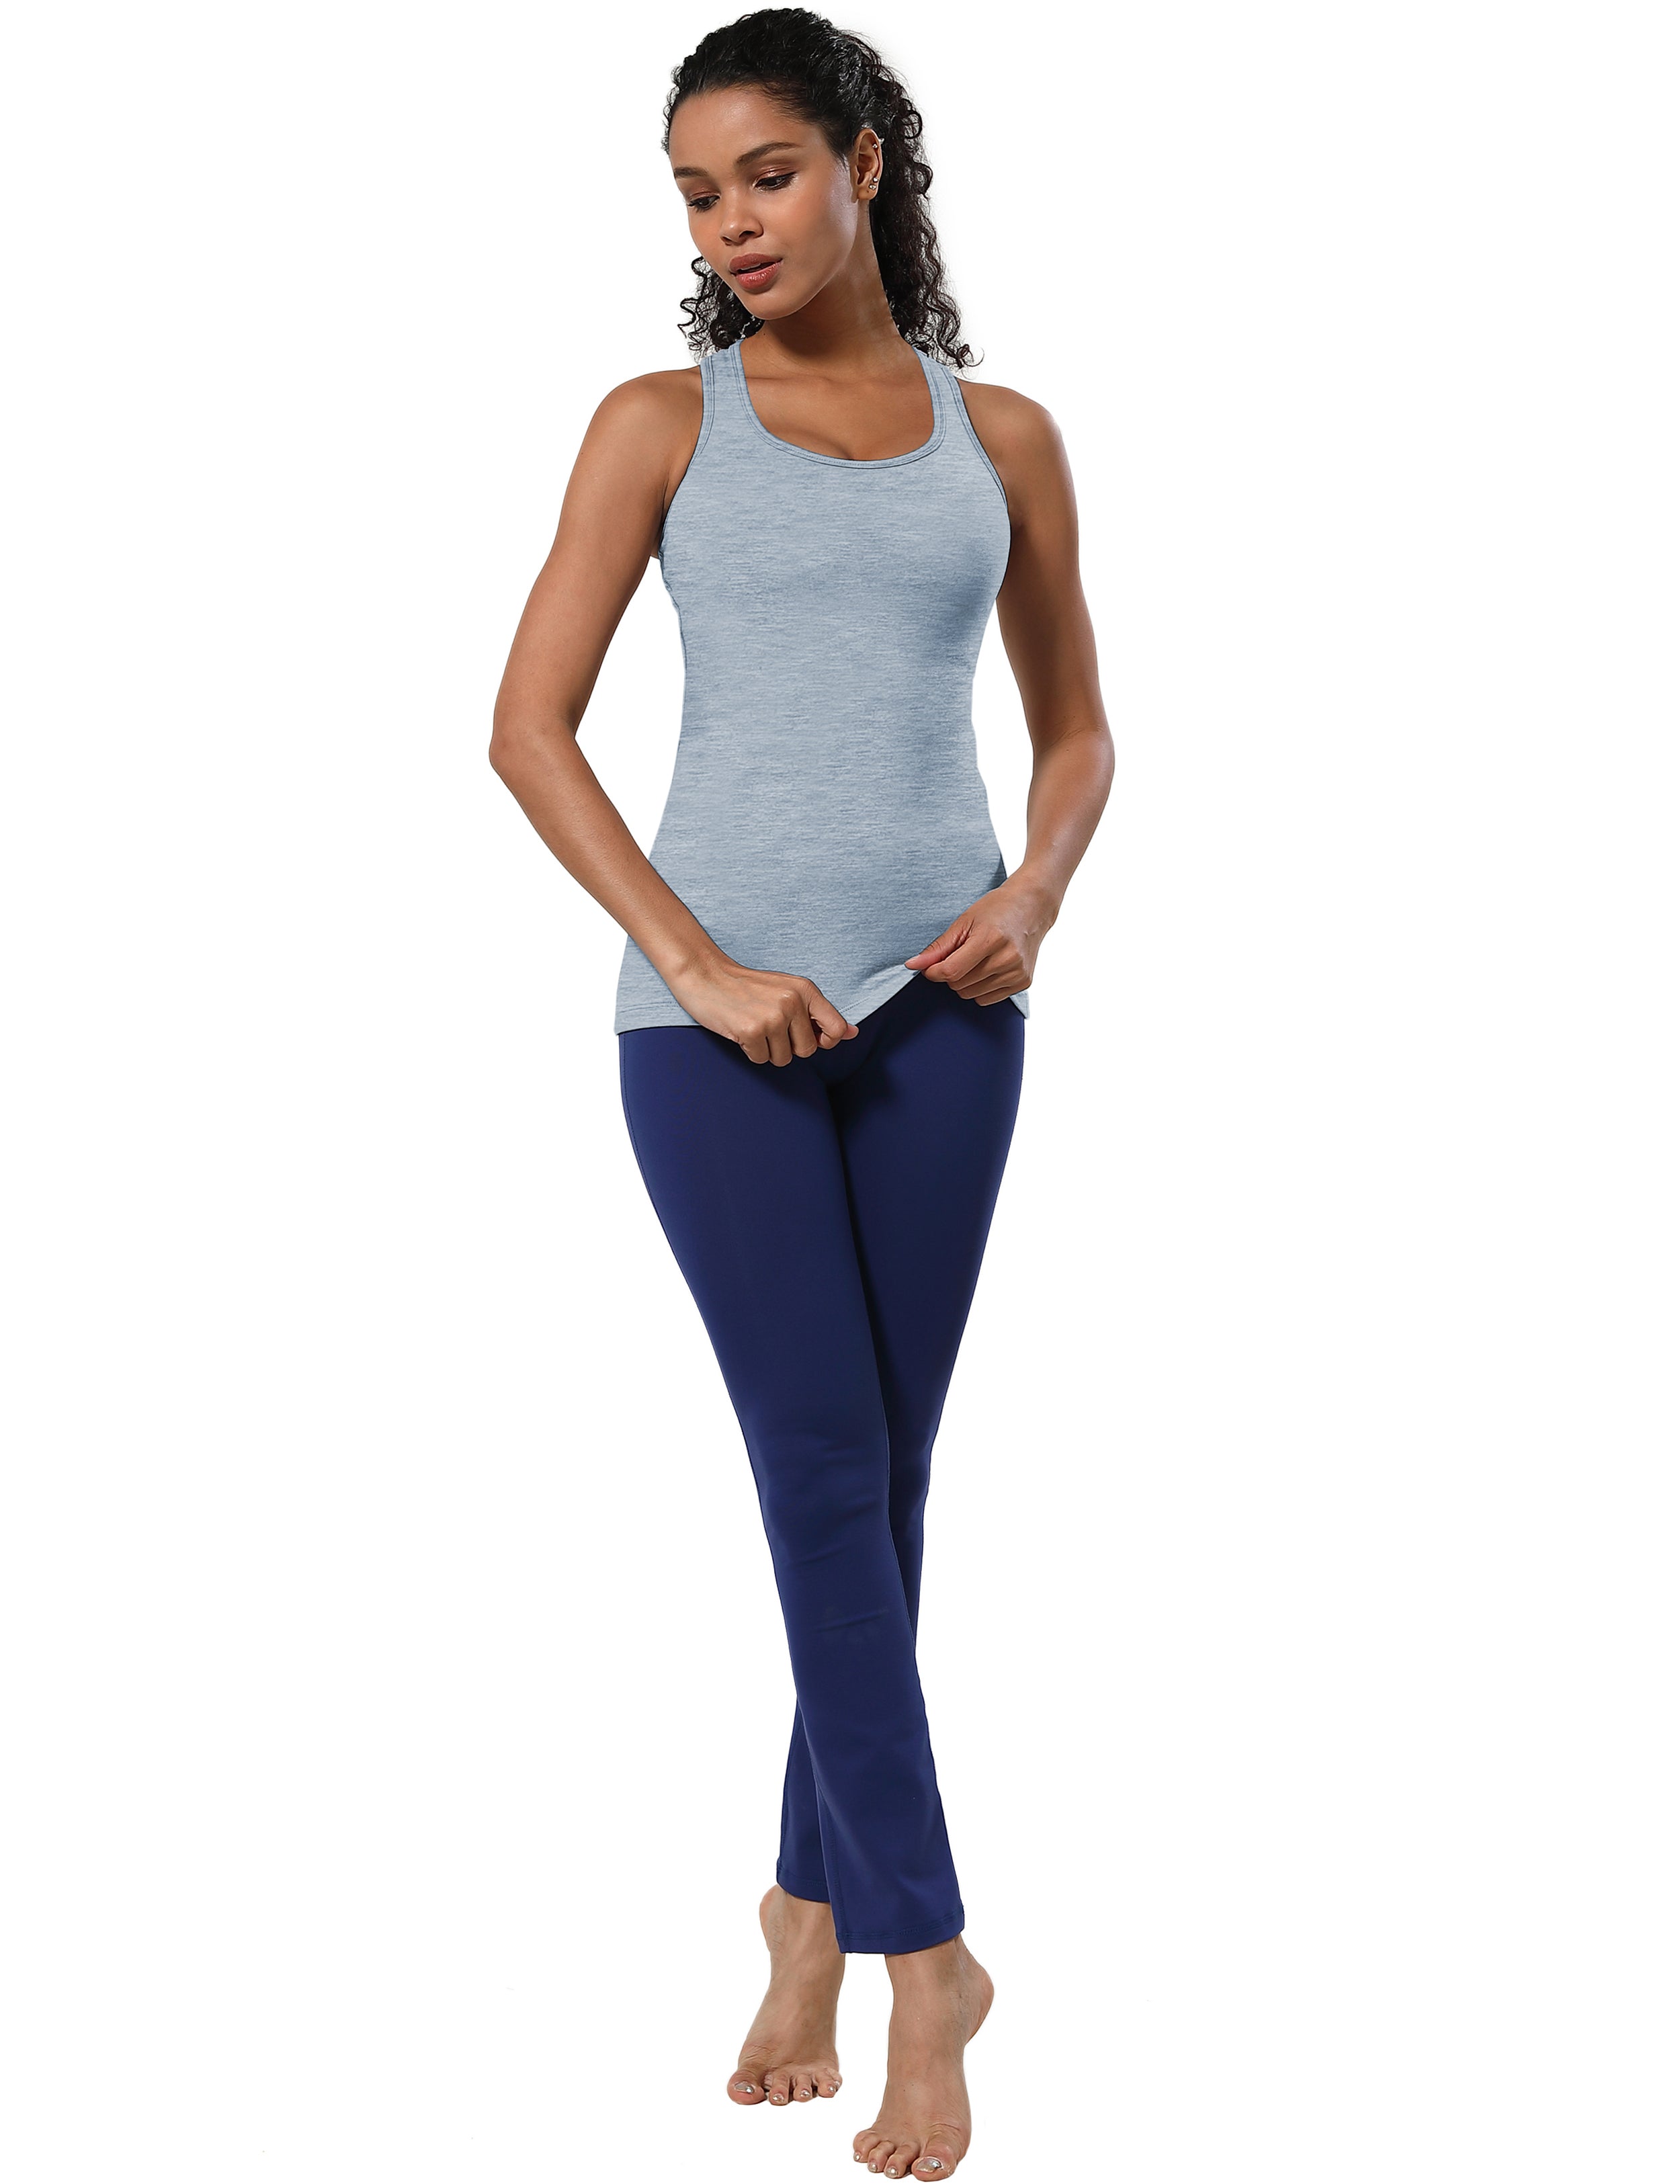 Racerback Athletic Tank Tops heatherblue 92%Nylon/8%Spandex(Cotton Soft) Designed for Golf Tight Fit So buttery soft, it feels weightless Sweat-wicking Four-way stretch Breathable Contours your body Sits below the waistband for moderate, everyday coverage